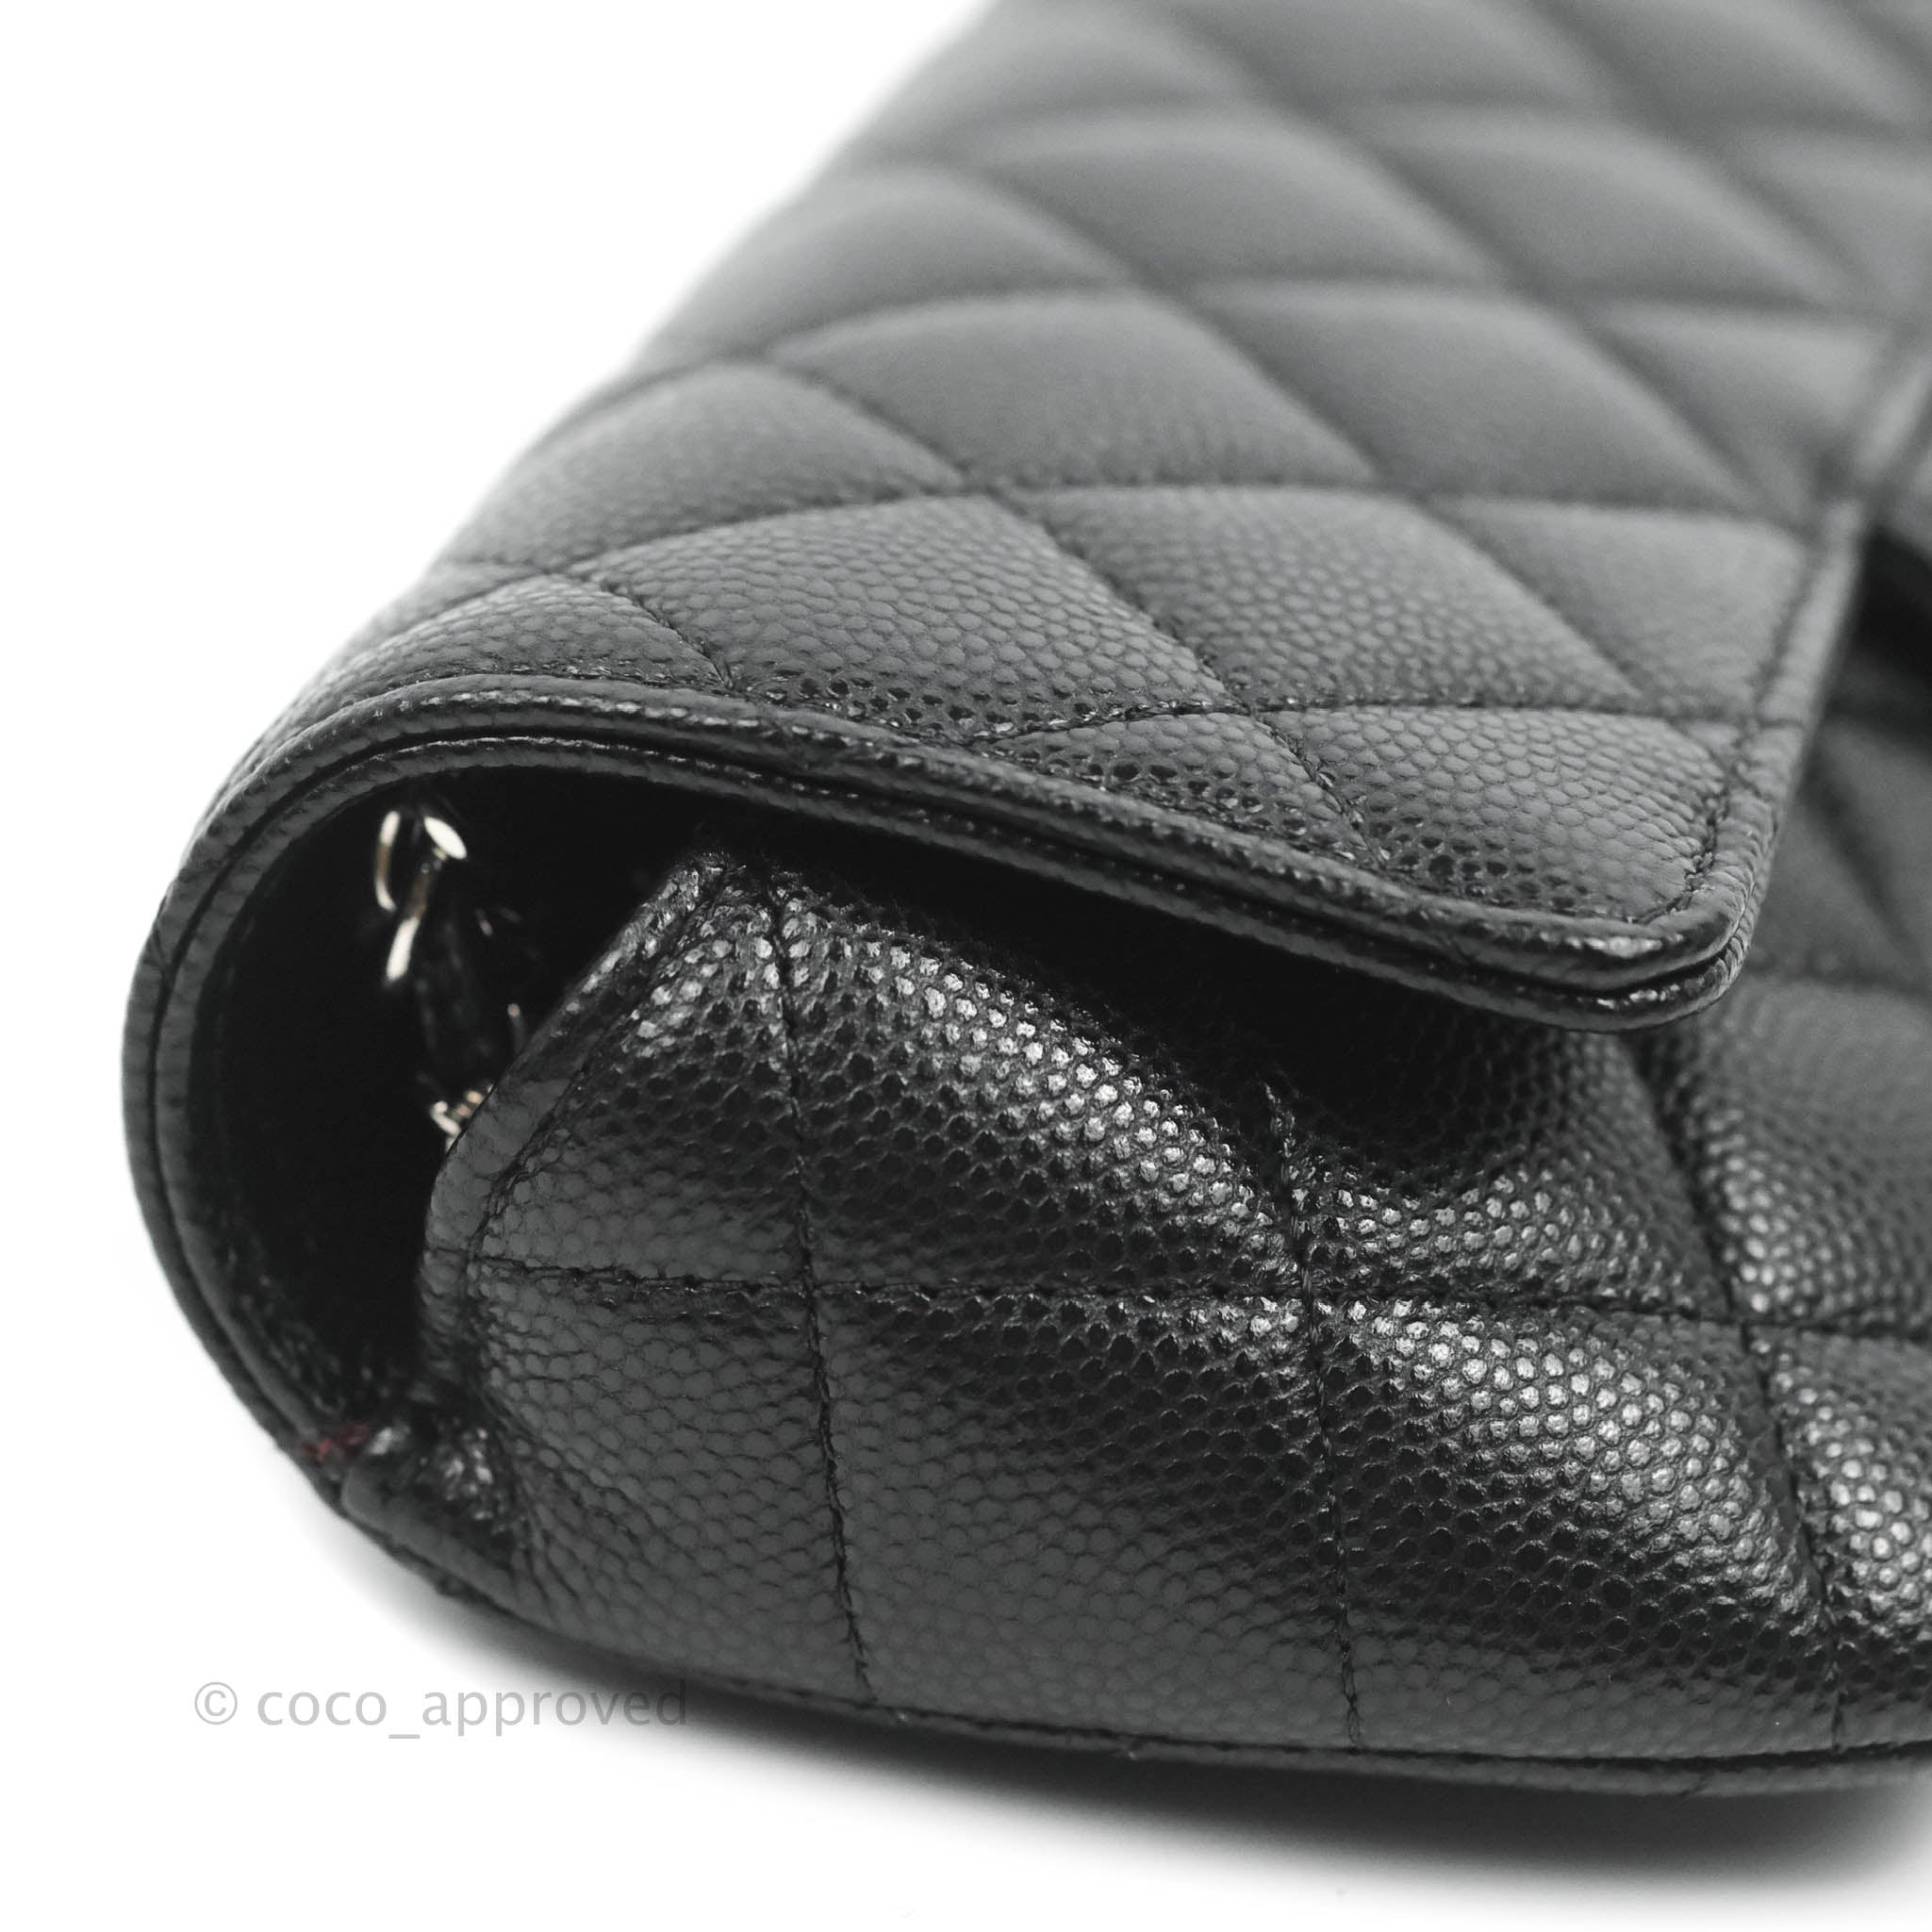 CHANEL Caviar Quilted Clutch With Chain Black 1100228